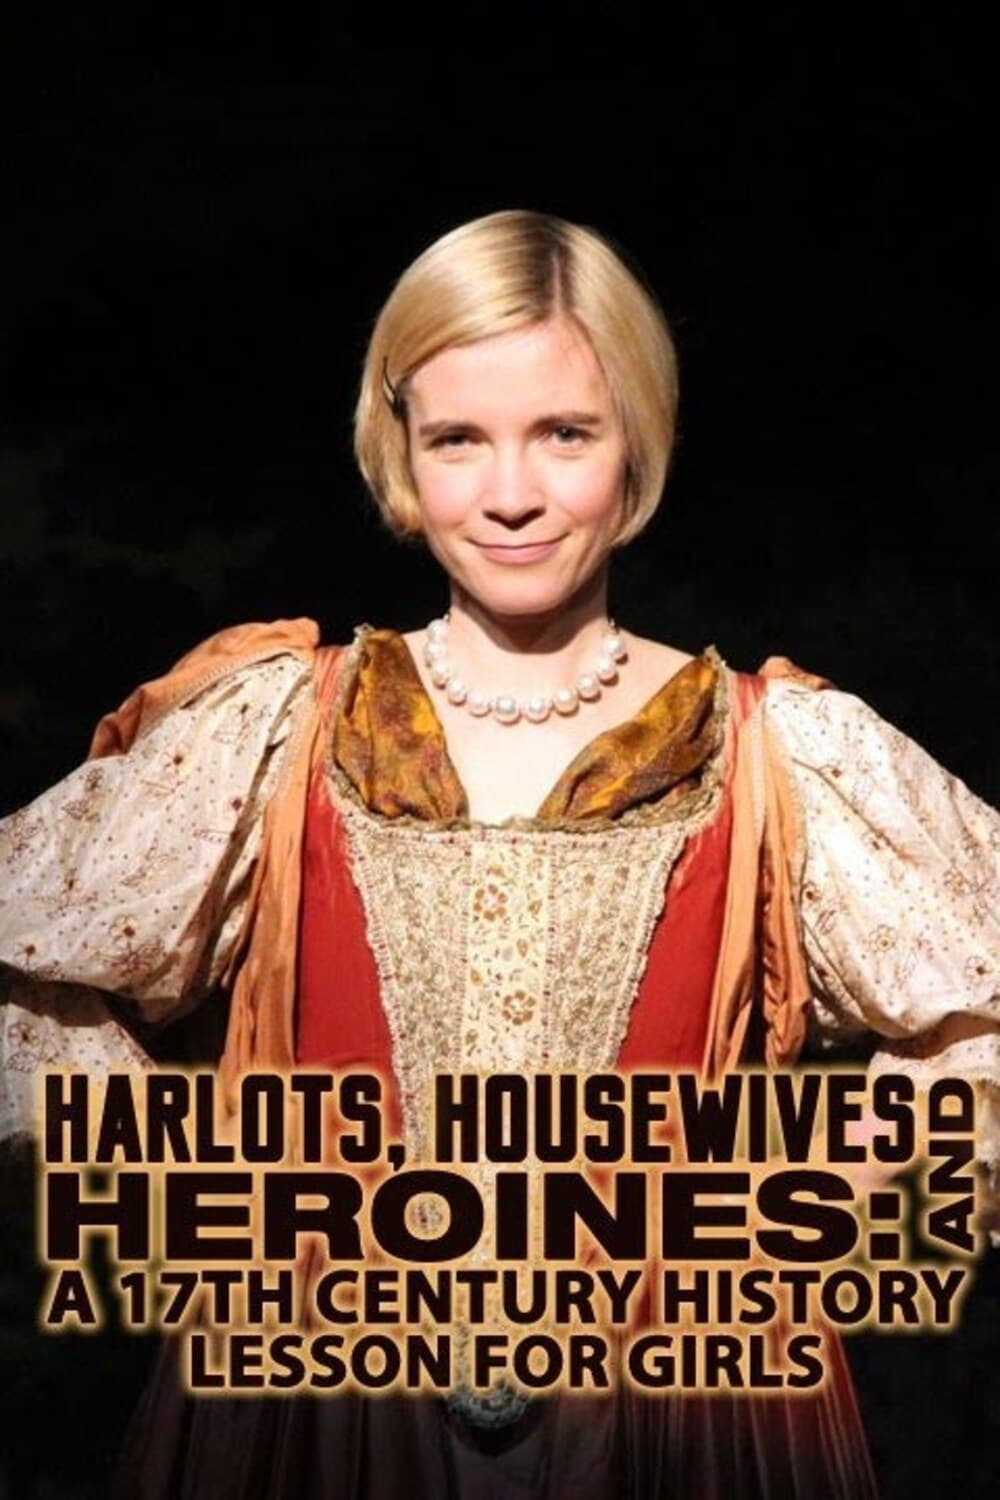 Harlots, Housewives and Heroines: A 17th Century History for Girls